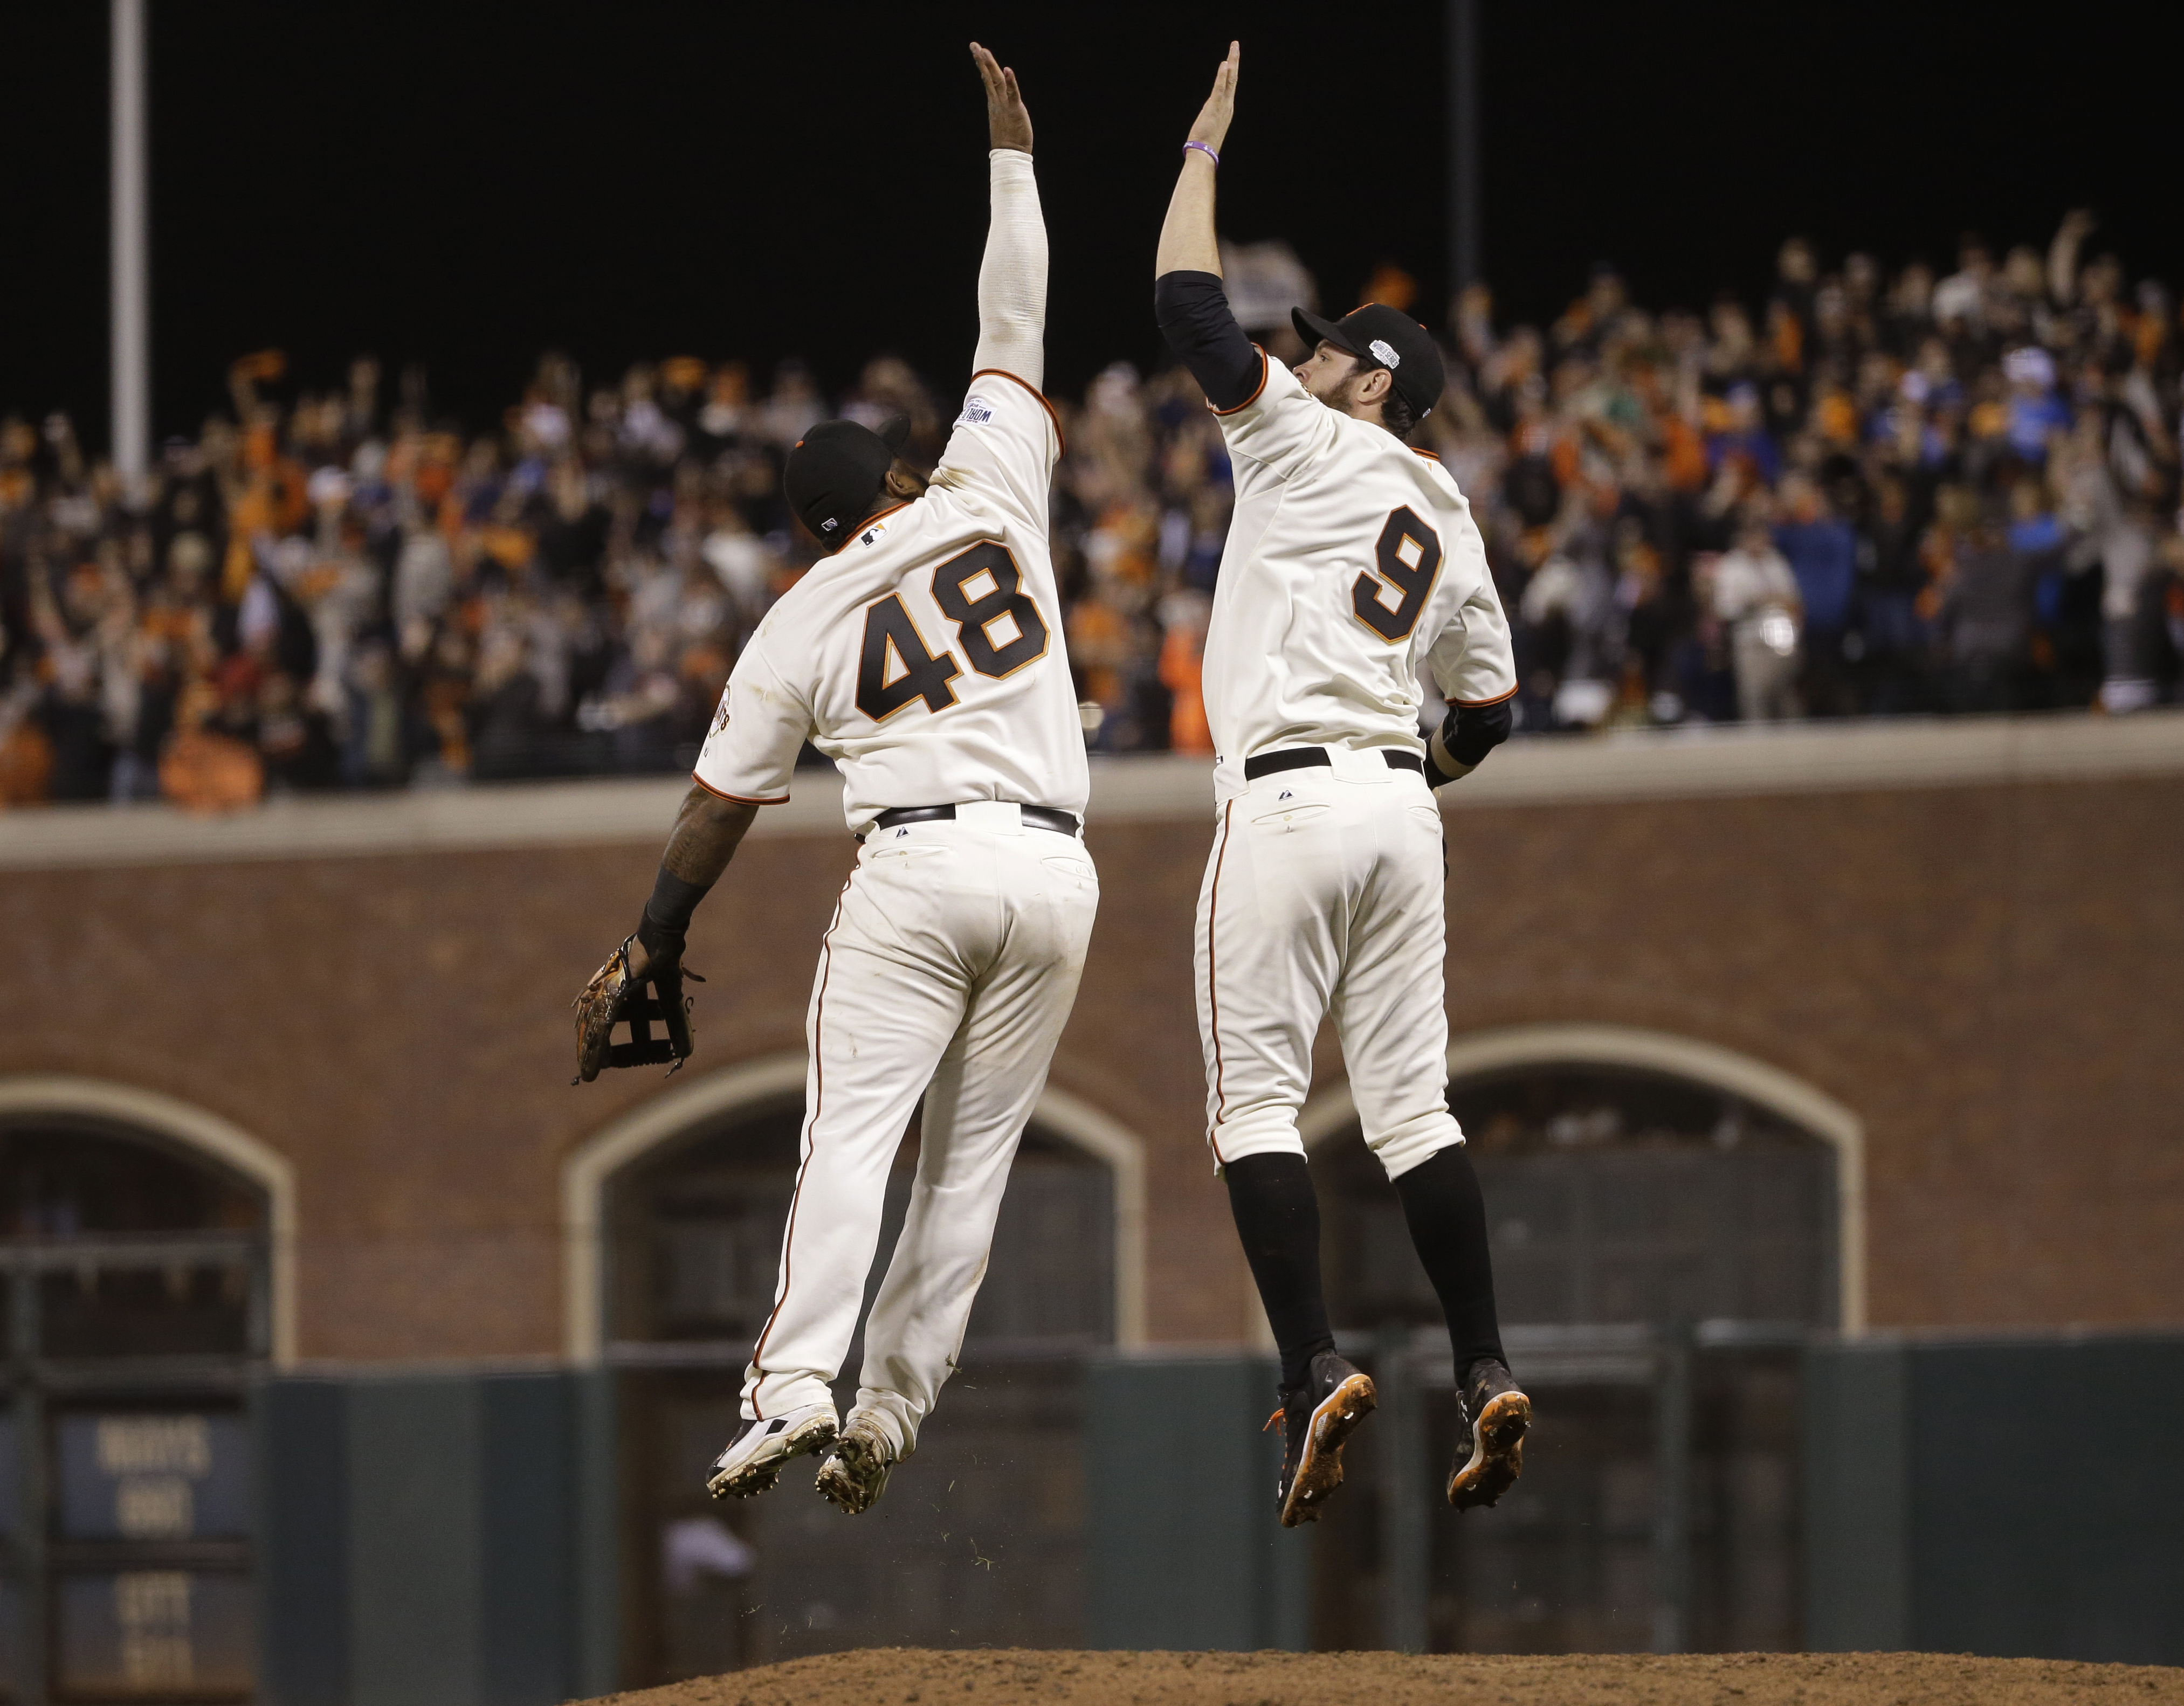 Giants rally, crush Royals to knot series